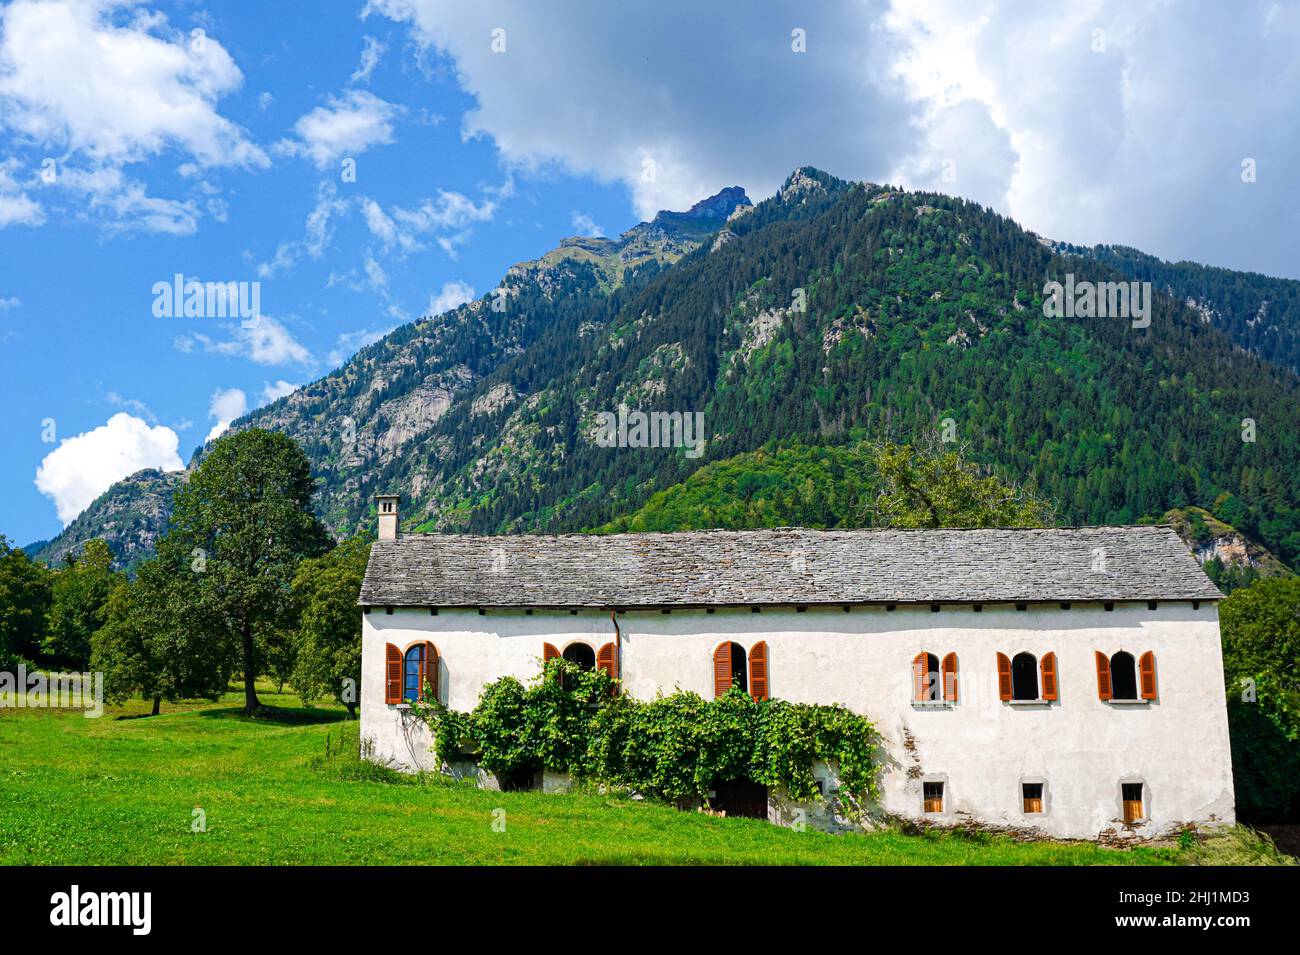 A big old farm in the alpine mountains Stock Photo